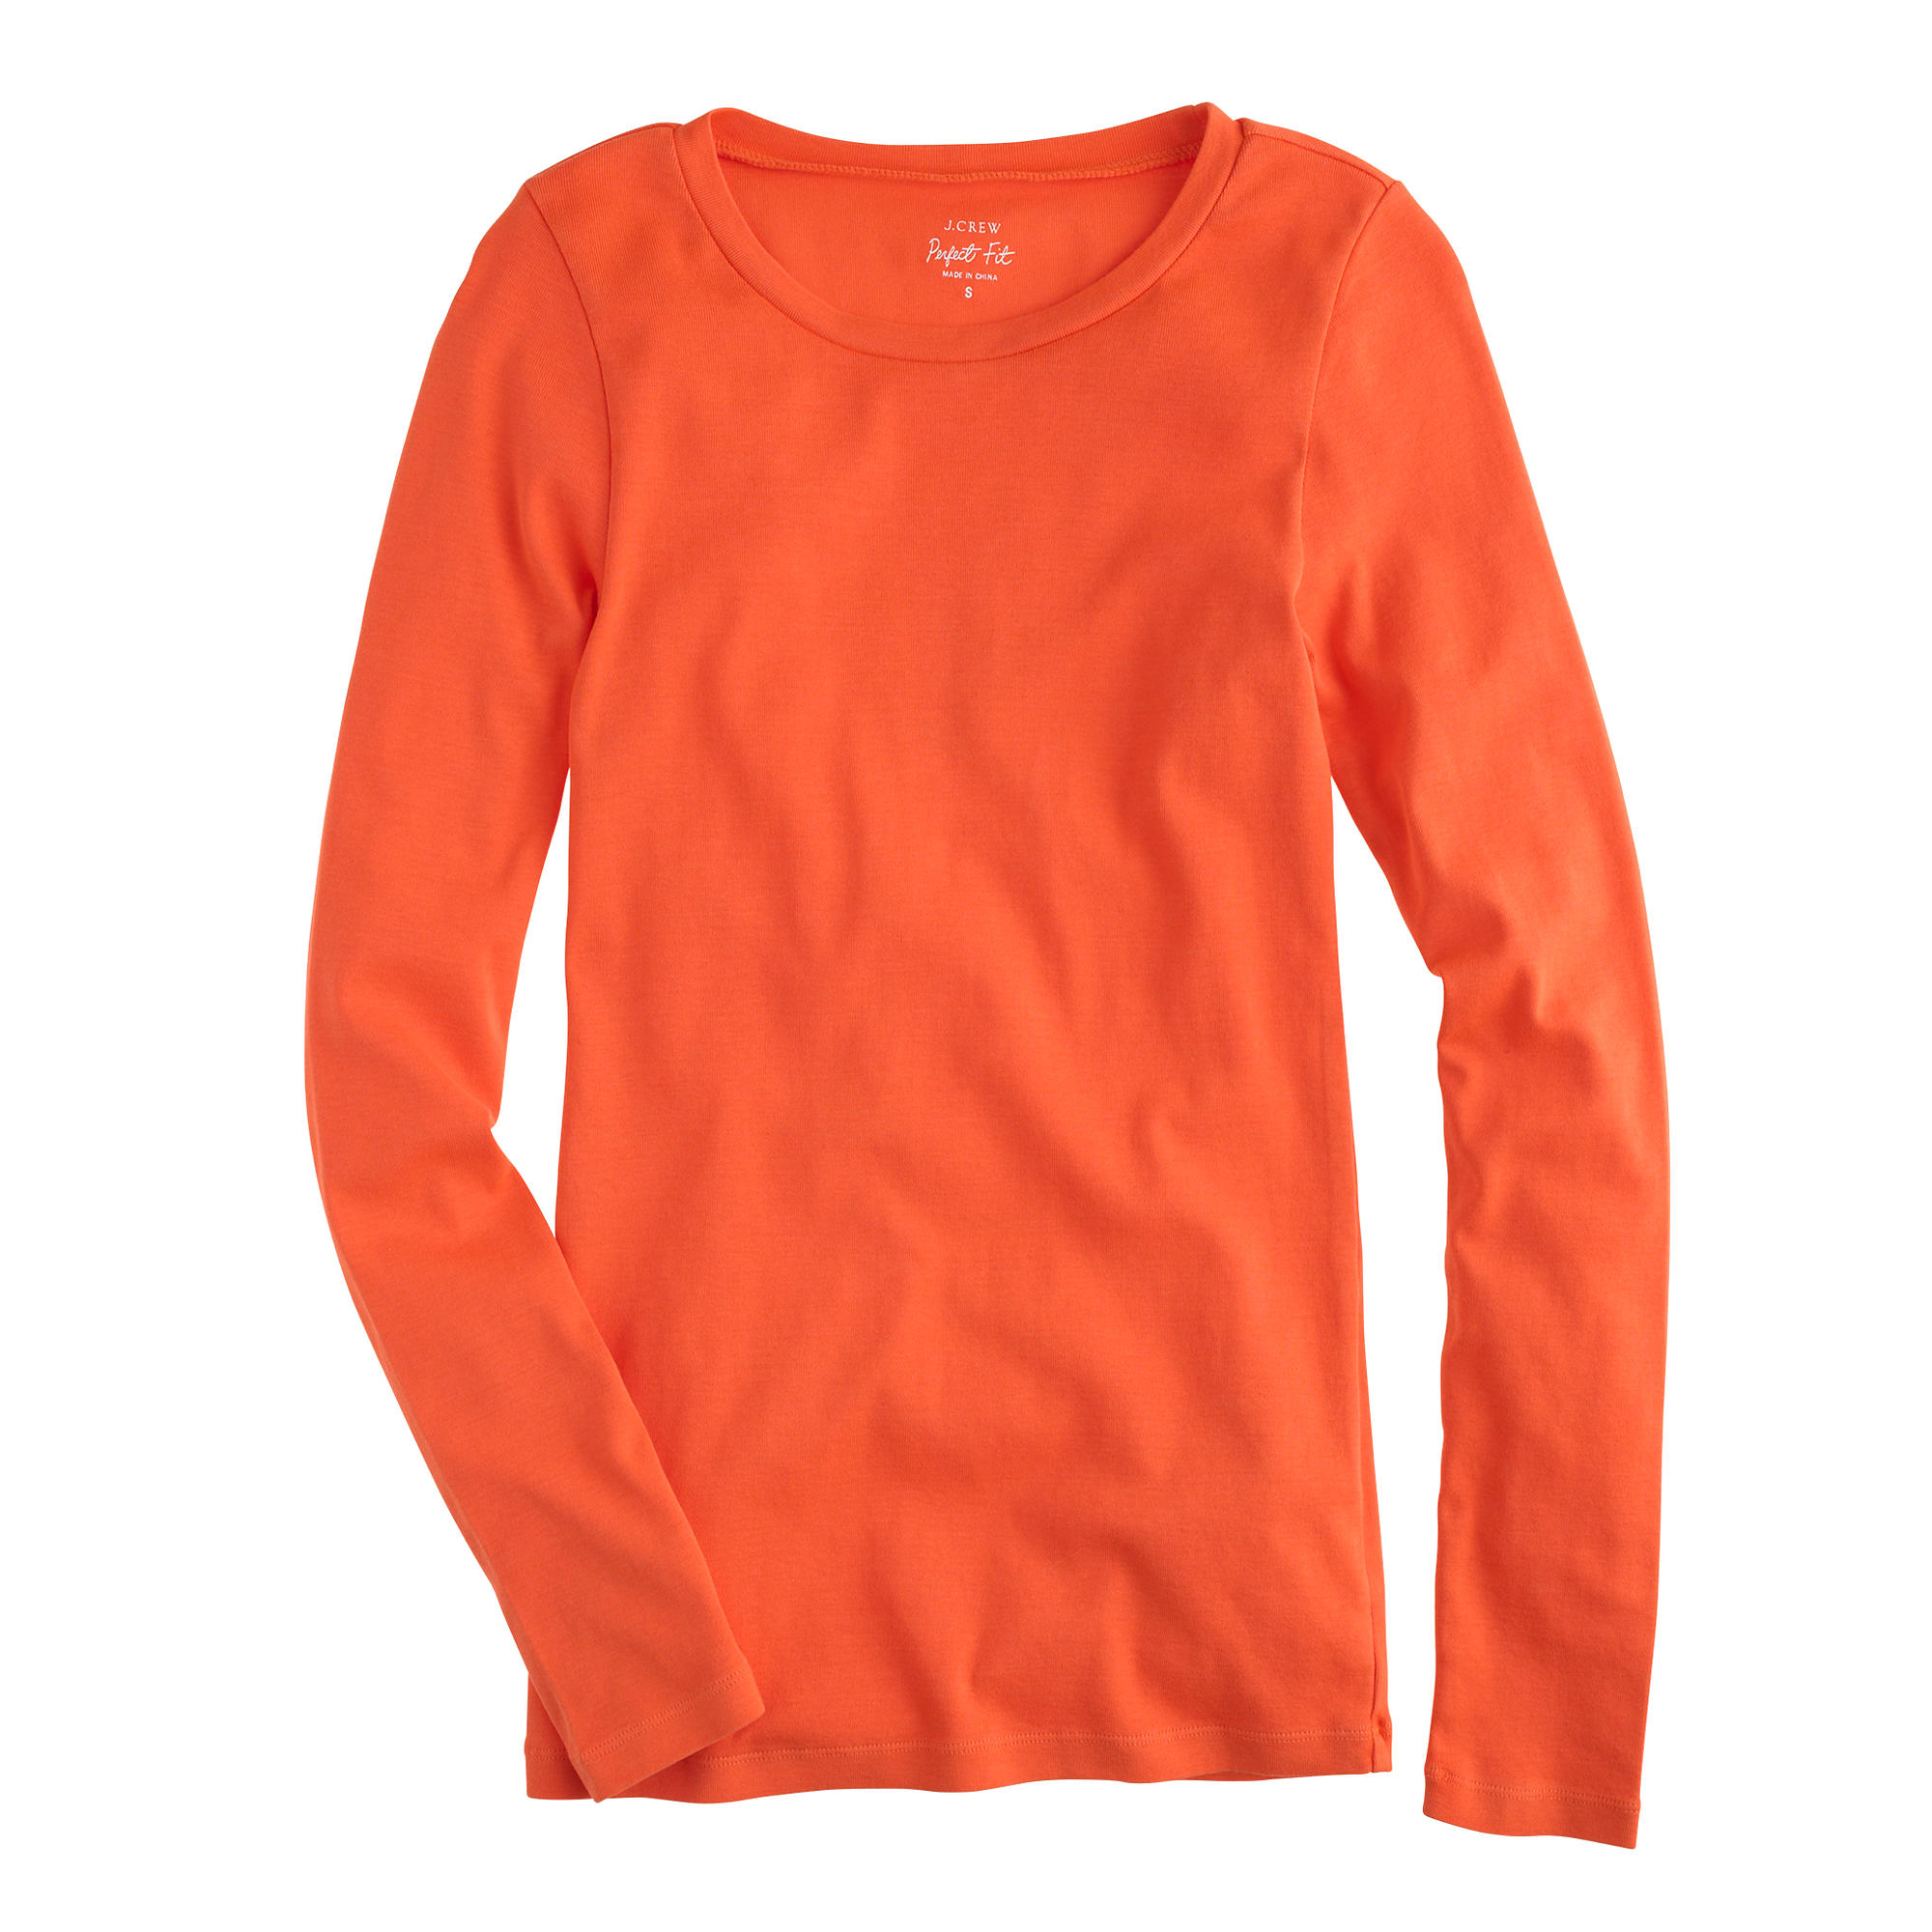 Lyst - J.Crew Perfect-fit Long-sleeve T-shirt in Orange2000 x 2000